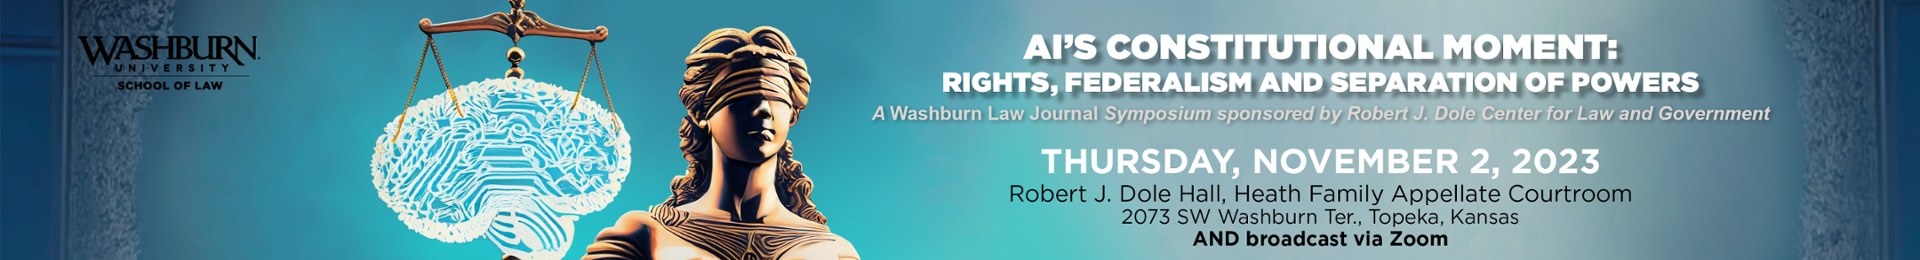 Graphic: Masthead for AI’s Constitutional Moment: Rights, Federalism and Separation of Powers symposium.